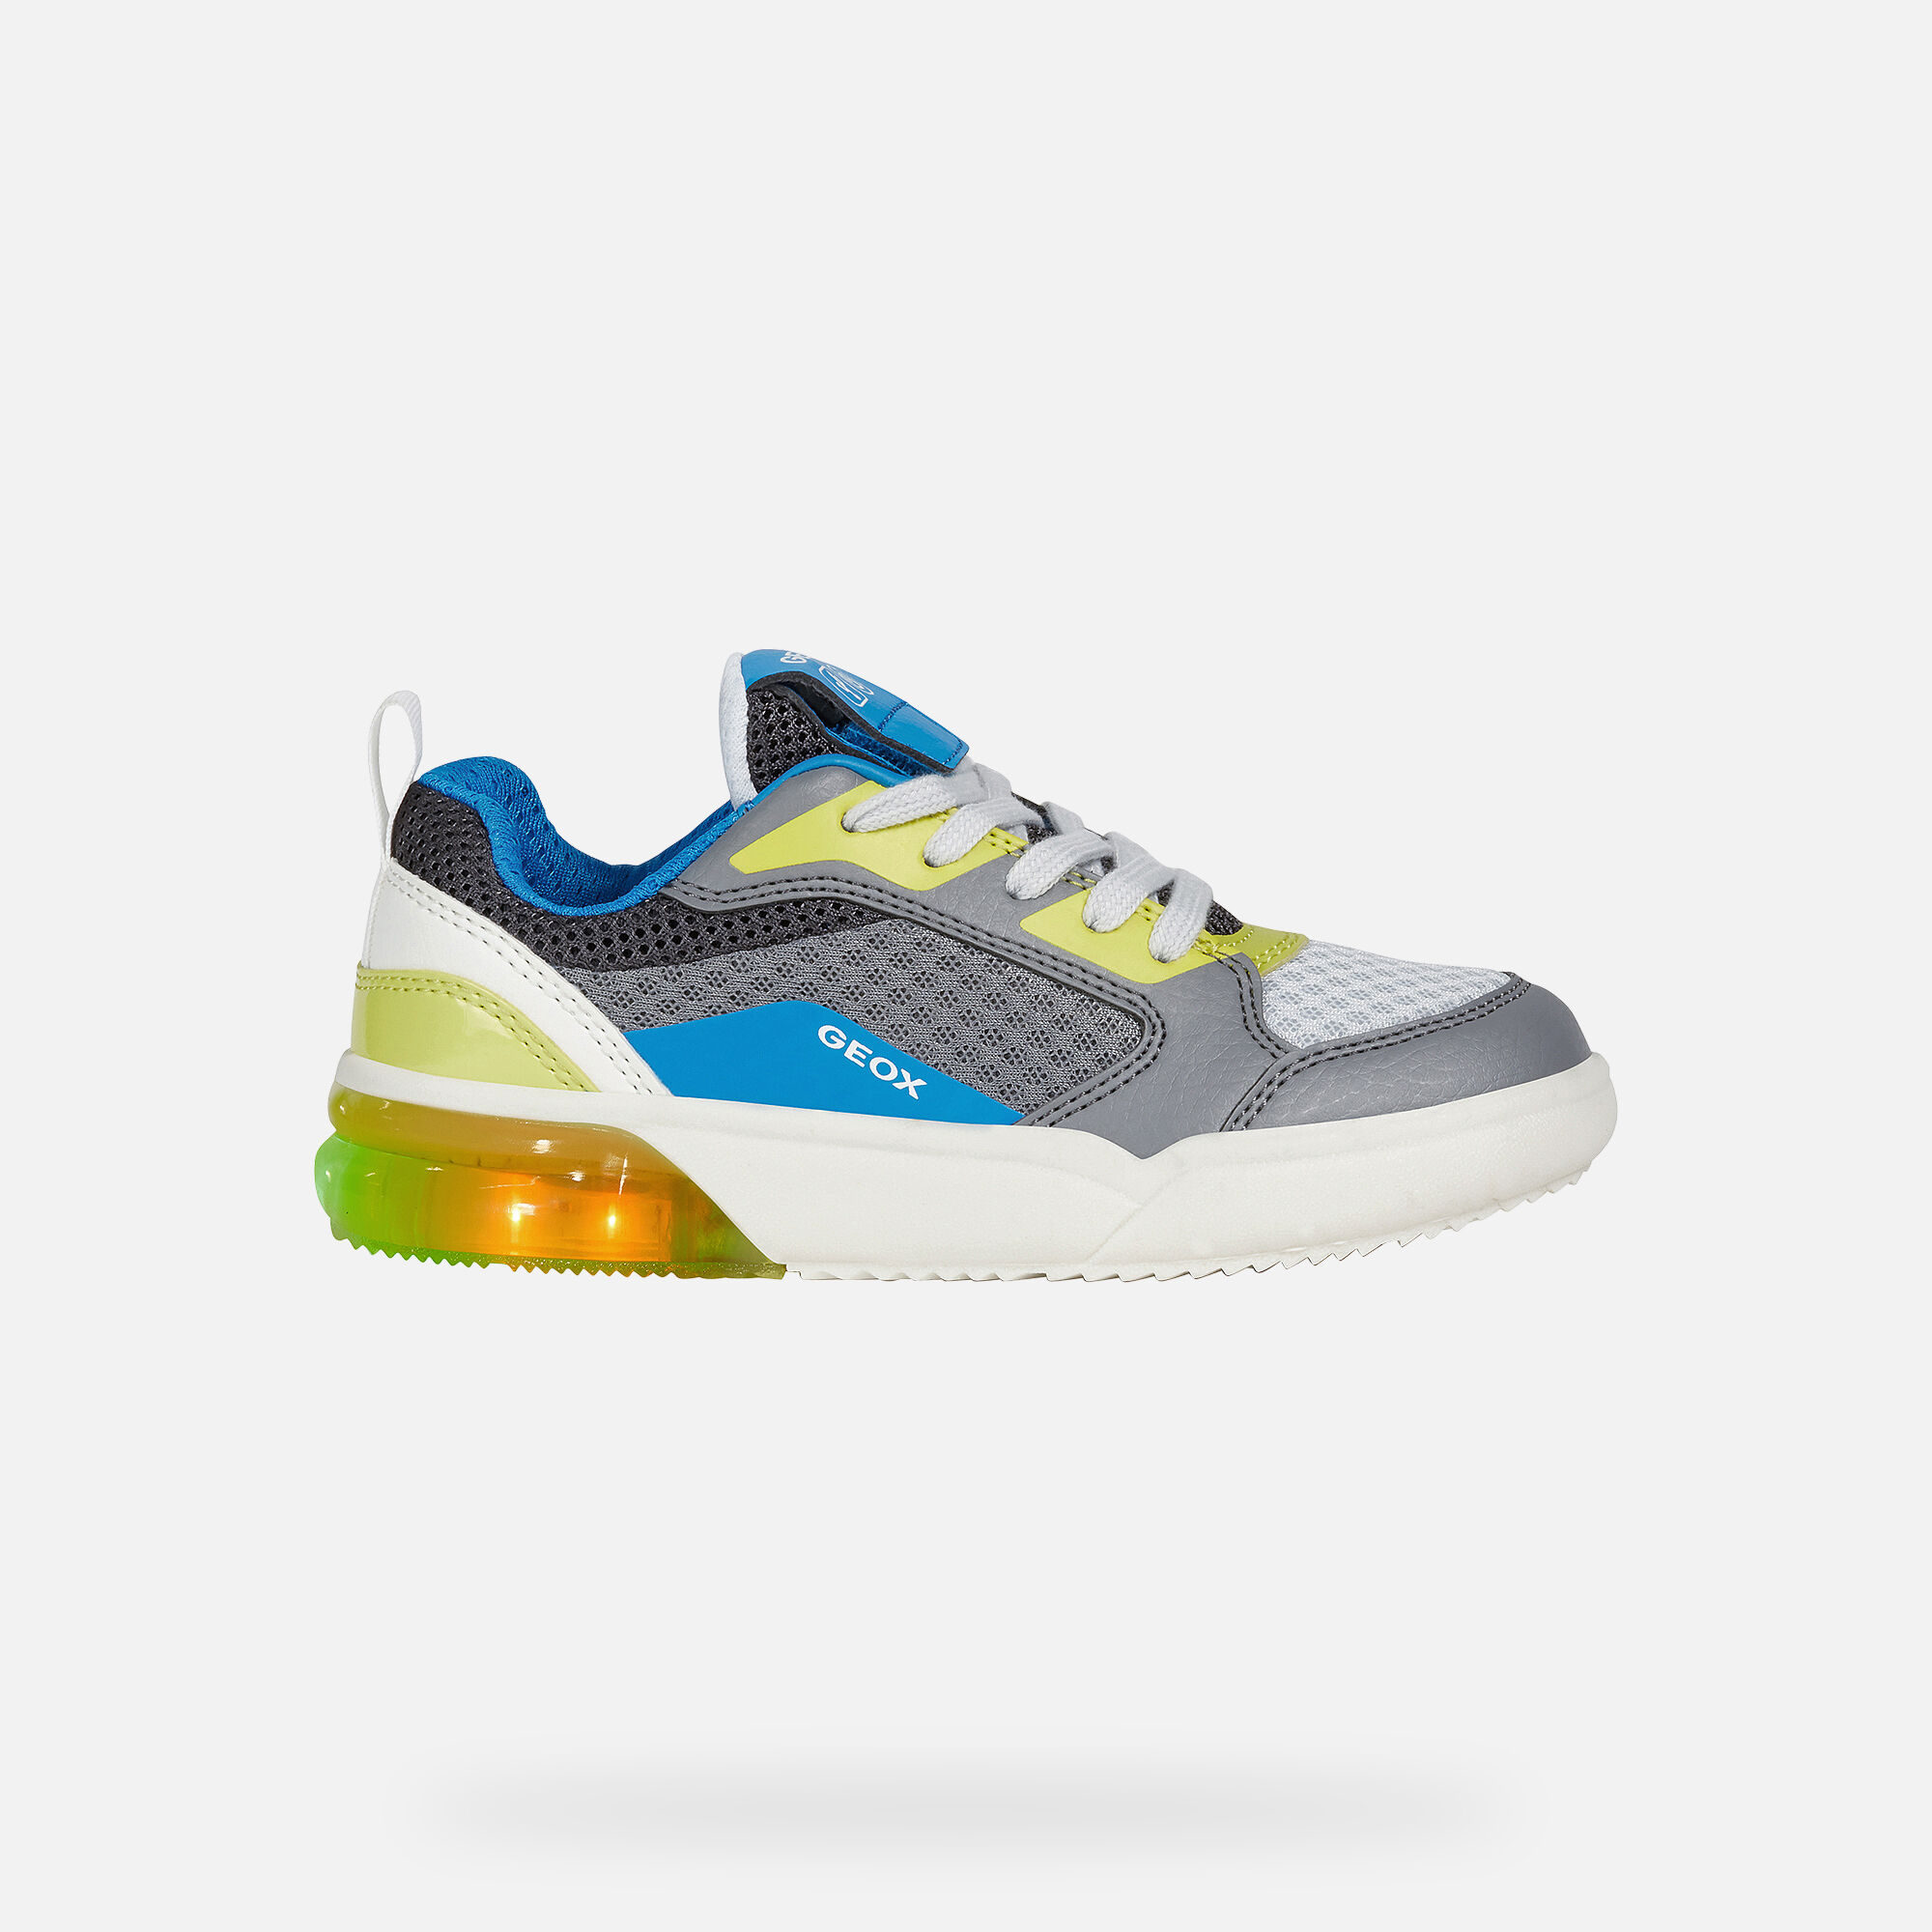 light up geox shoes